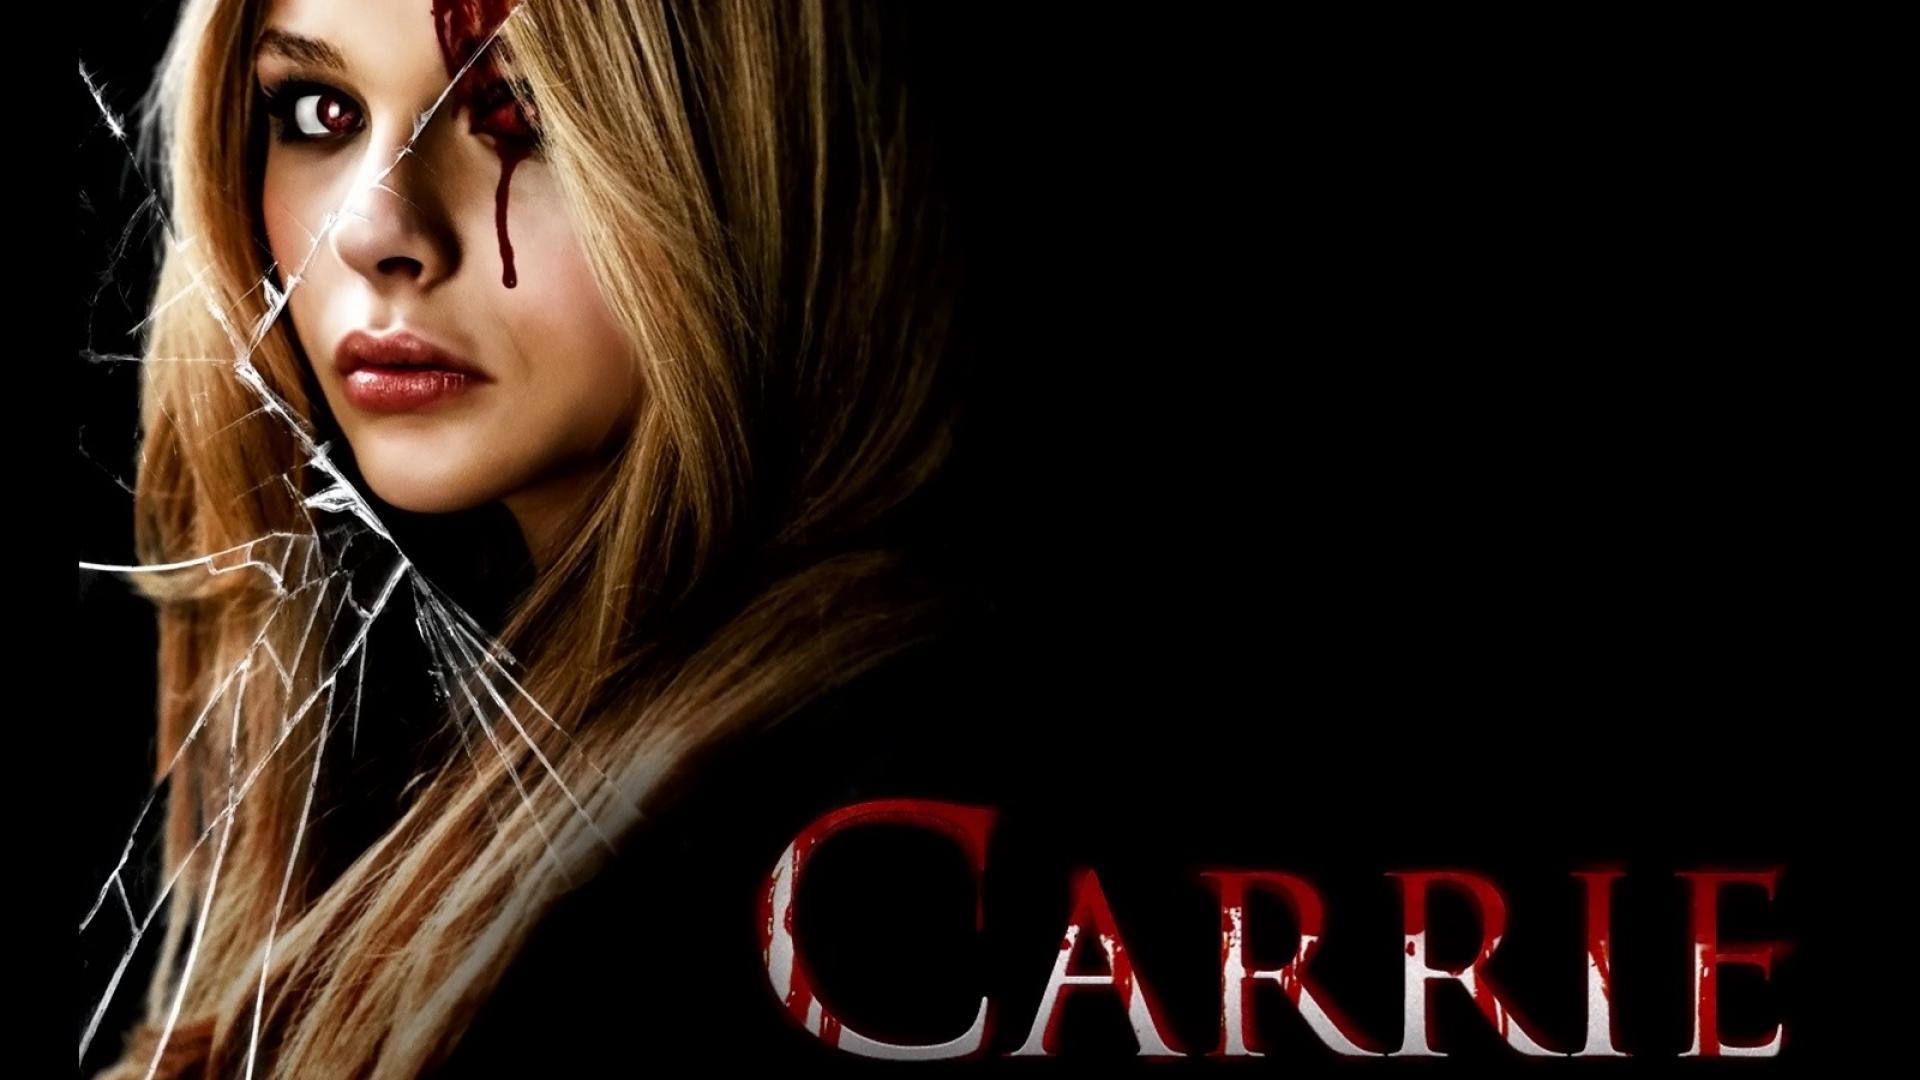 Aesthetic wallpaper collection  Carrie 1976 profile icons and wallpapers   Wattpad